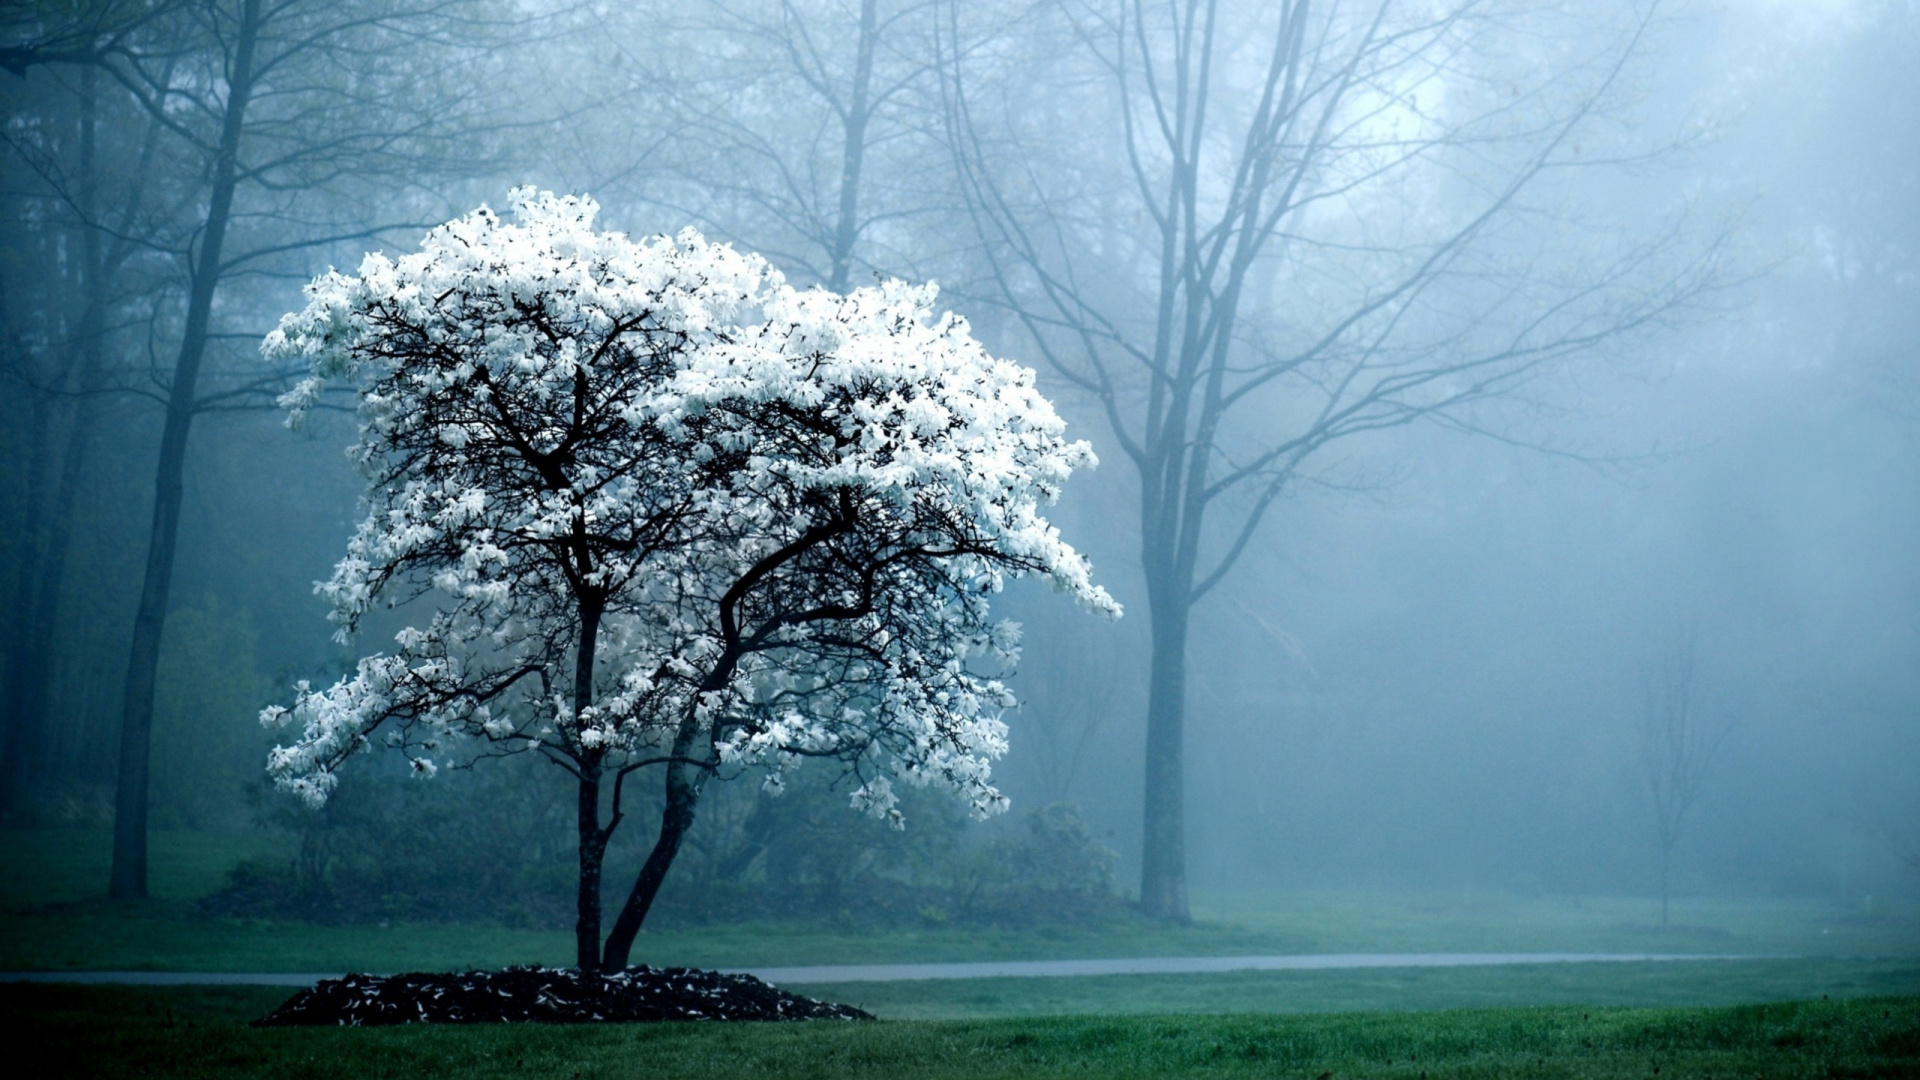 White Leaf Tree on Green Grass Field During Foggy Weather. Wallpaper in 1920x1080 Resolution